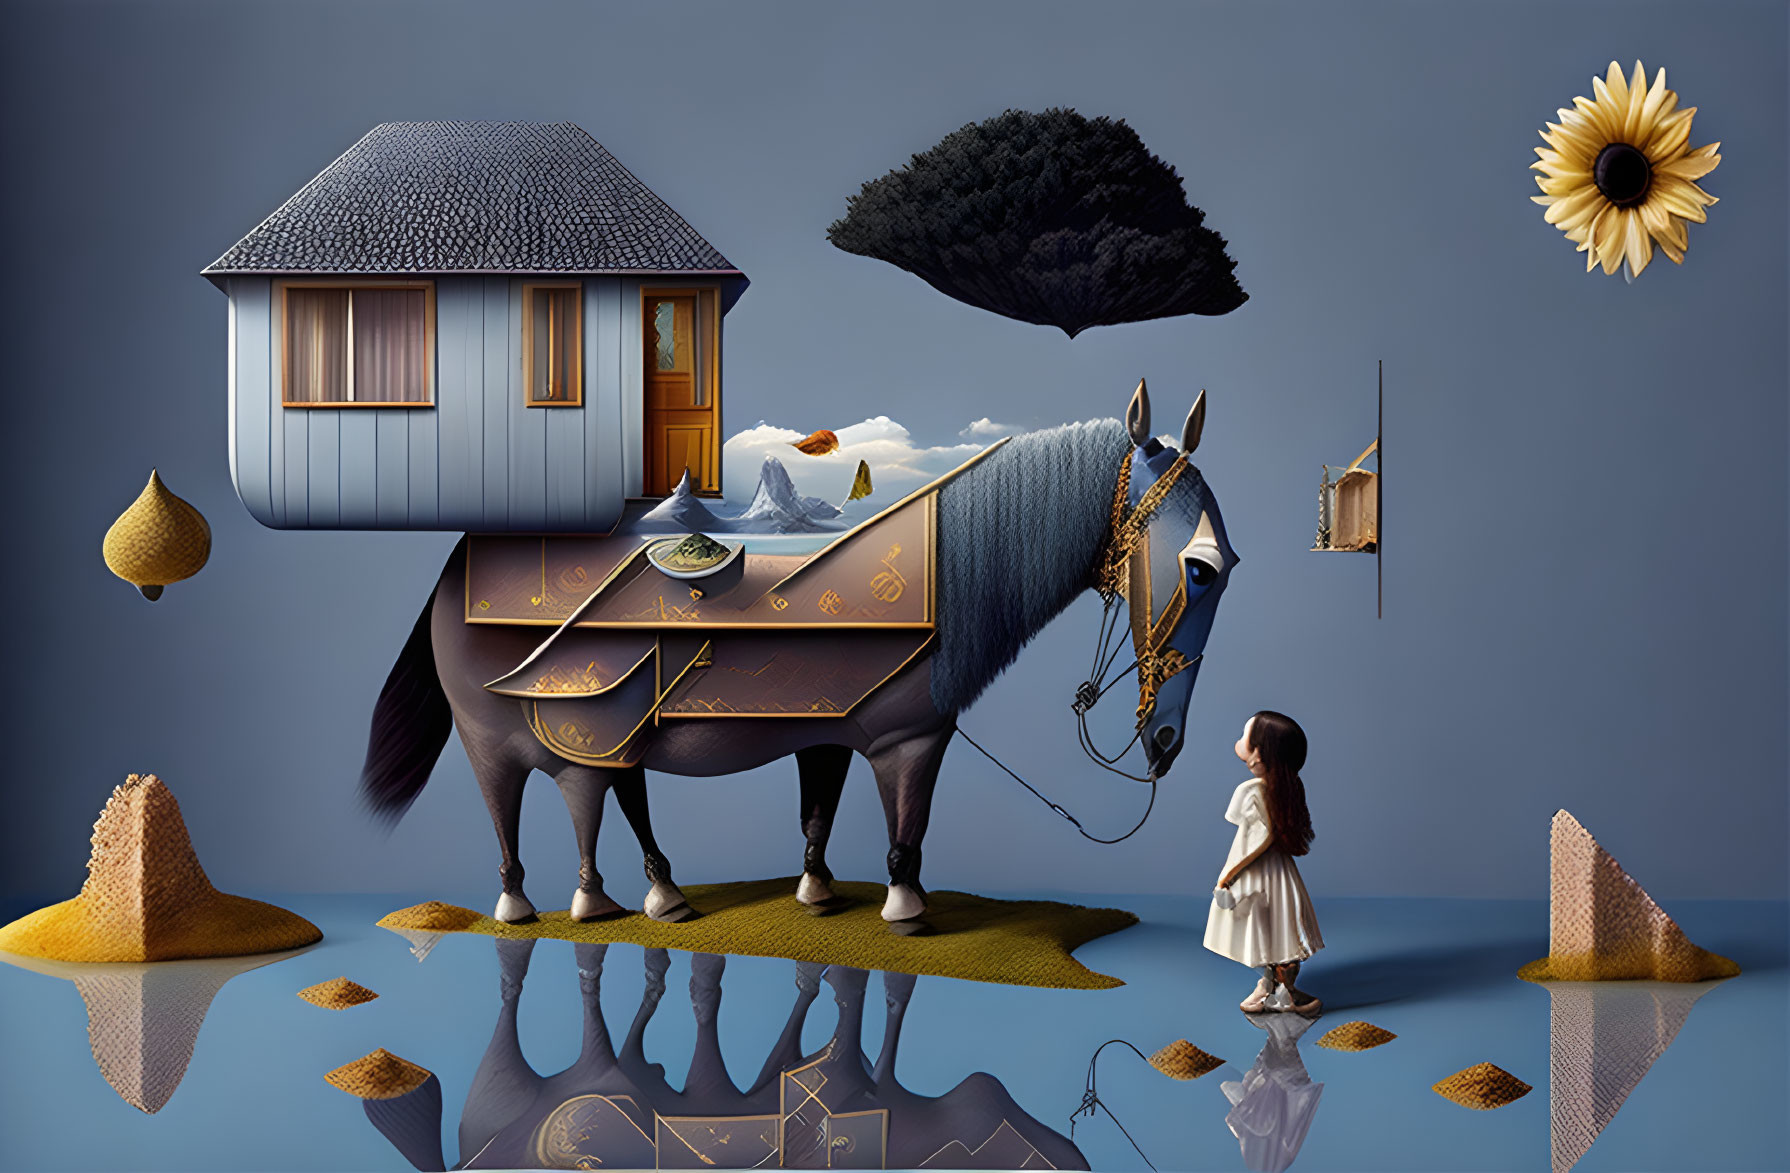 Surreal artwork: horse with house, girl, floating objects, beehive-shaped hills,